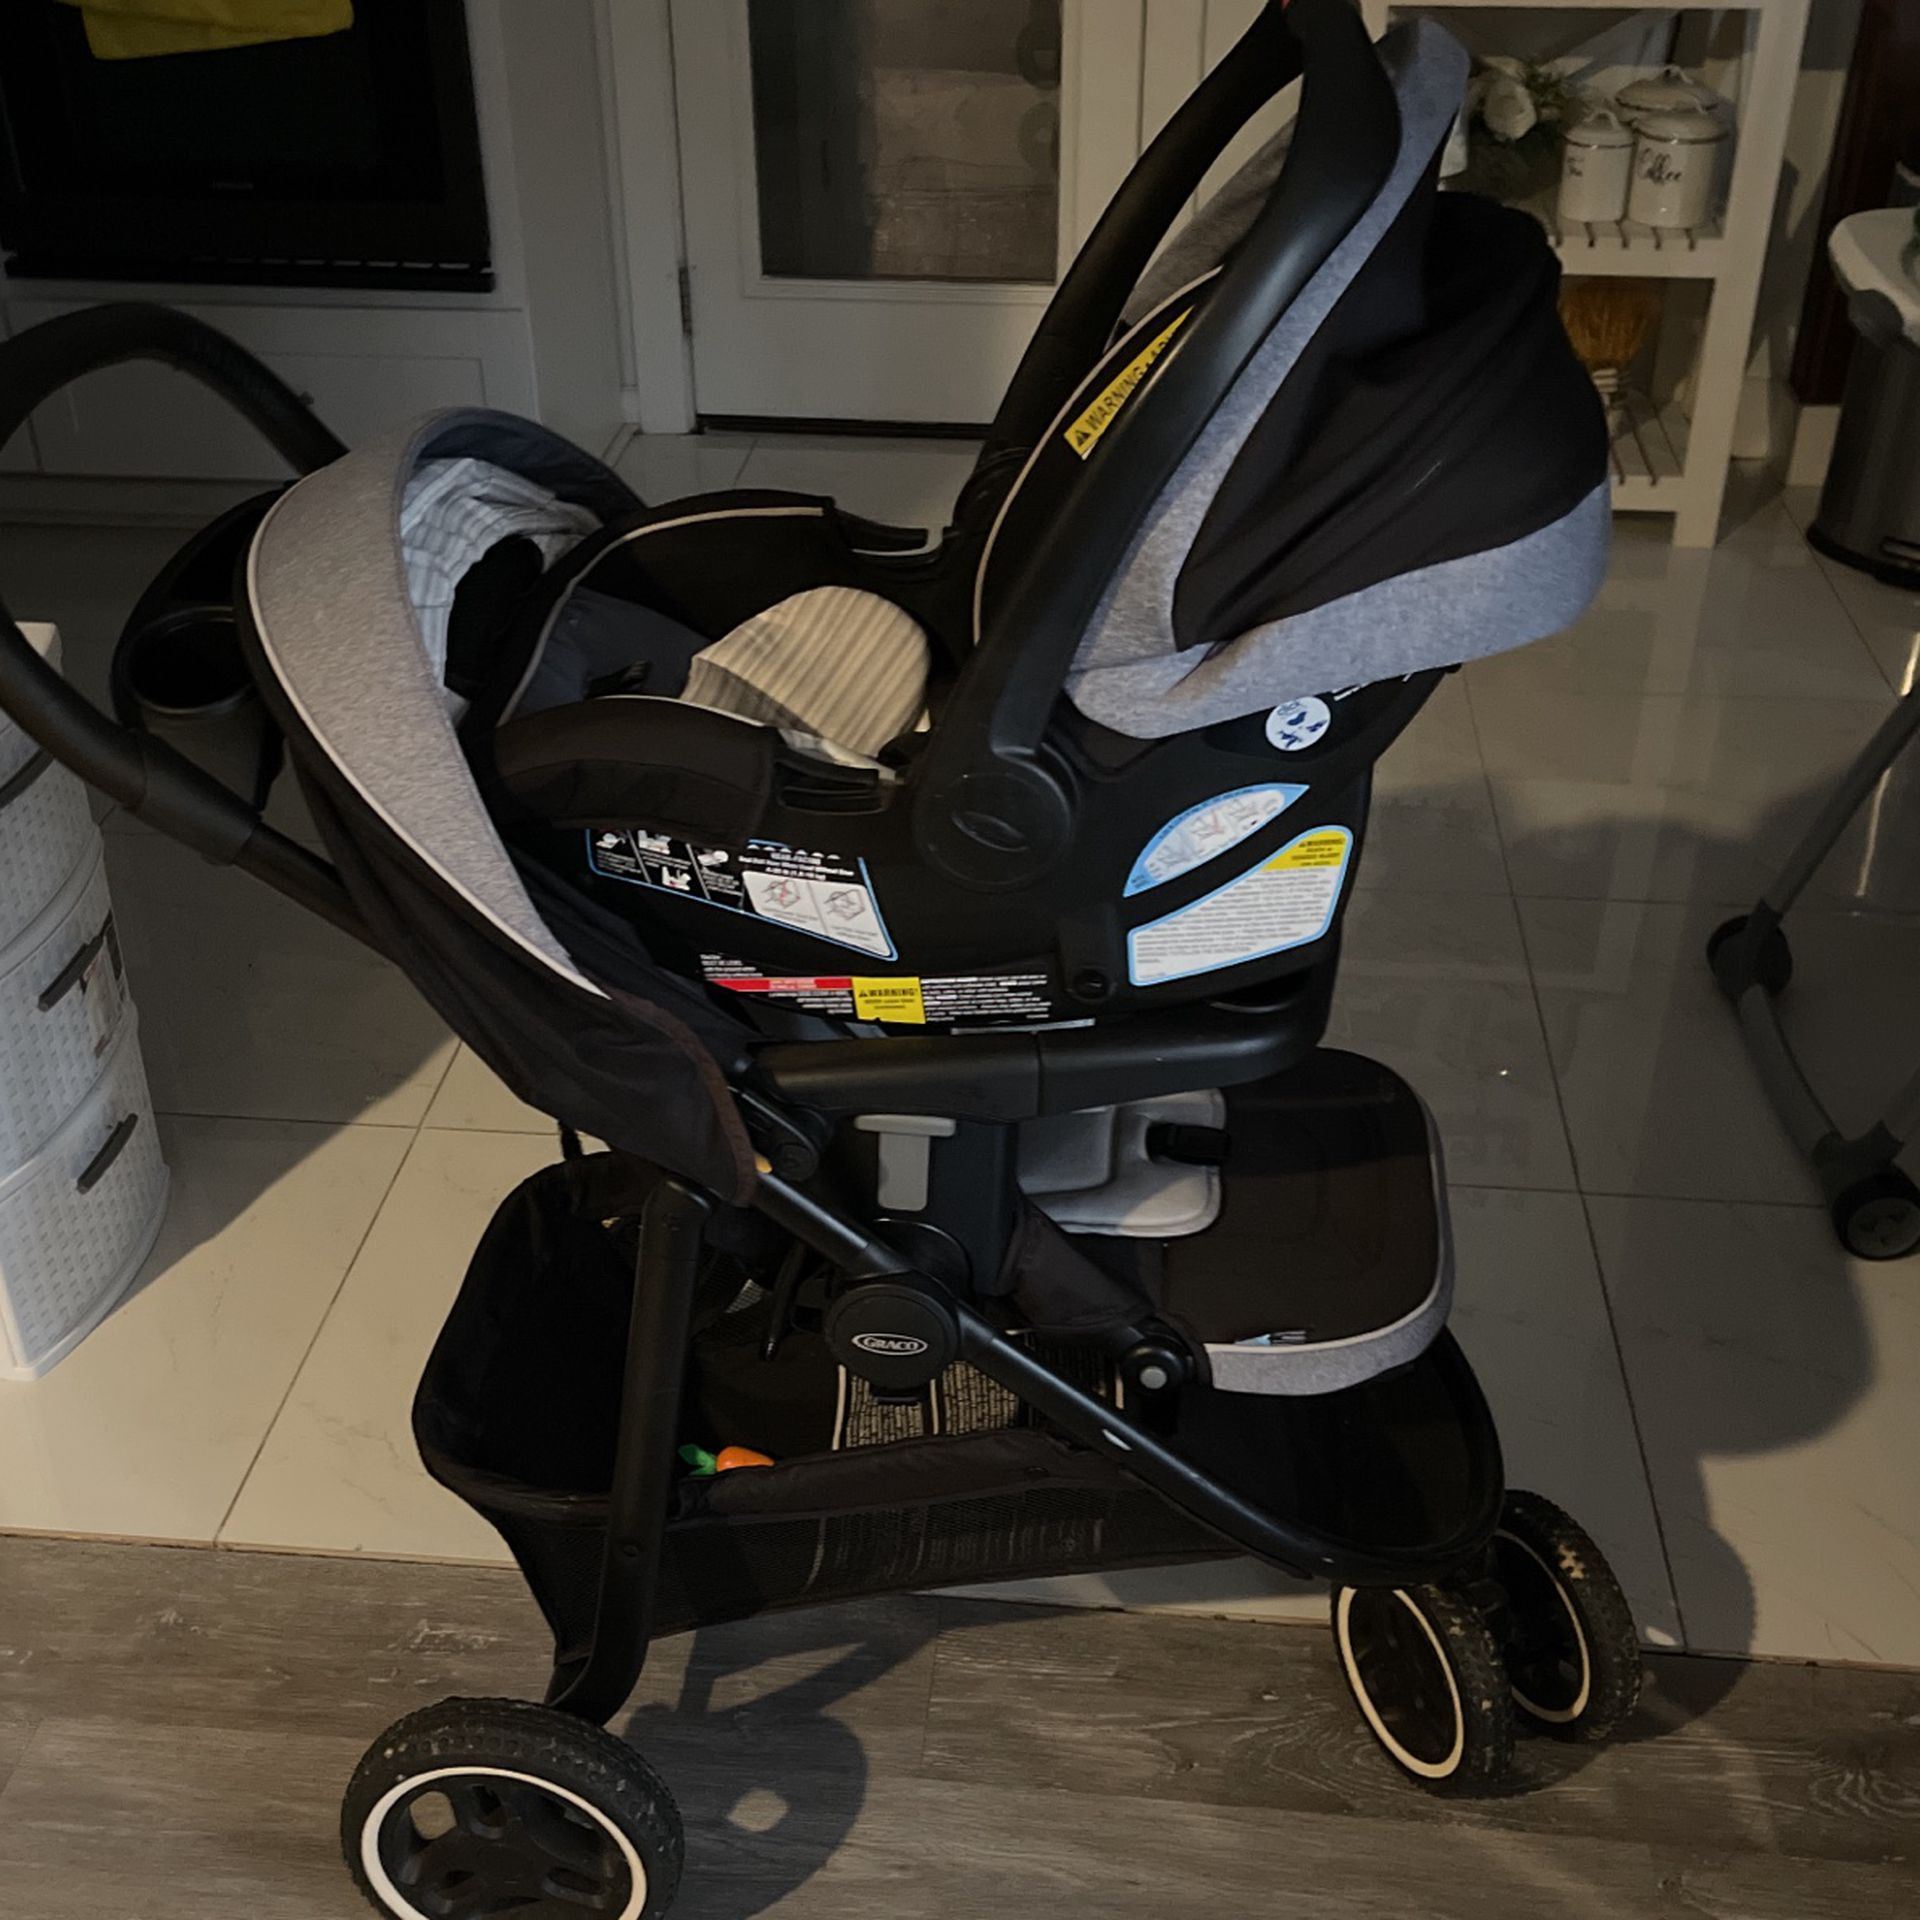 Graco Stroller And Baby Car Sits